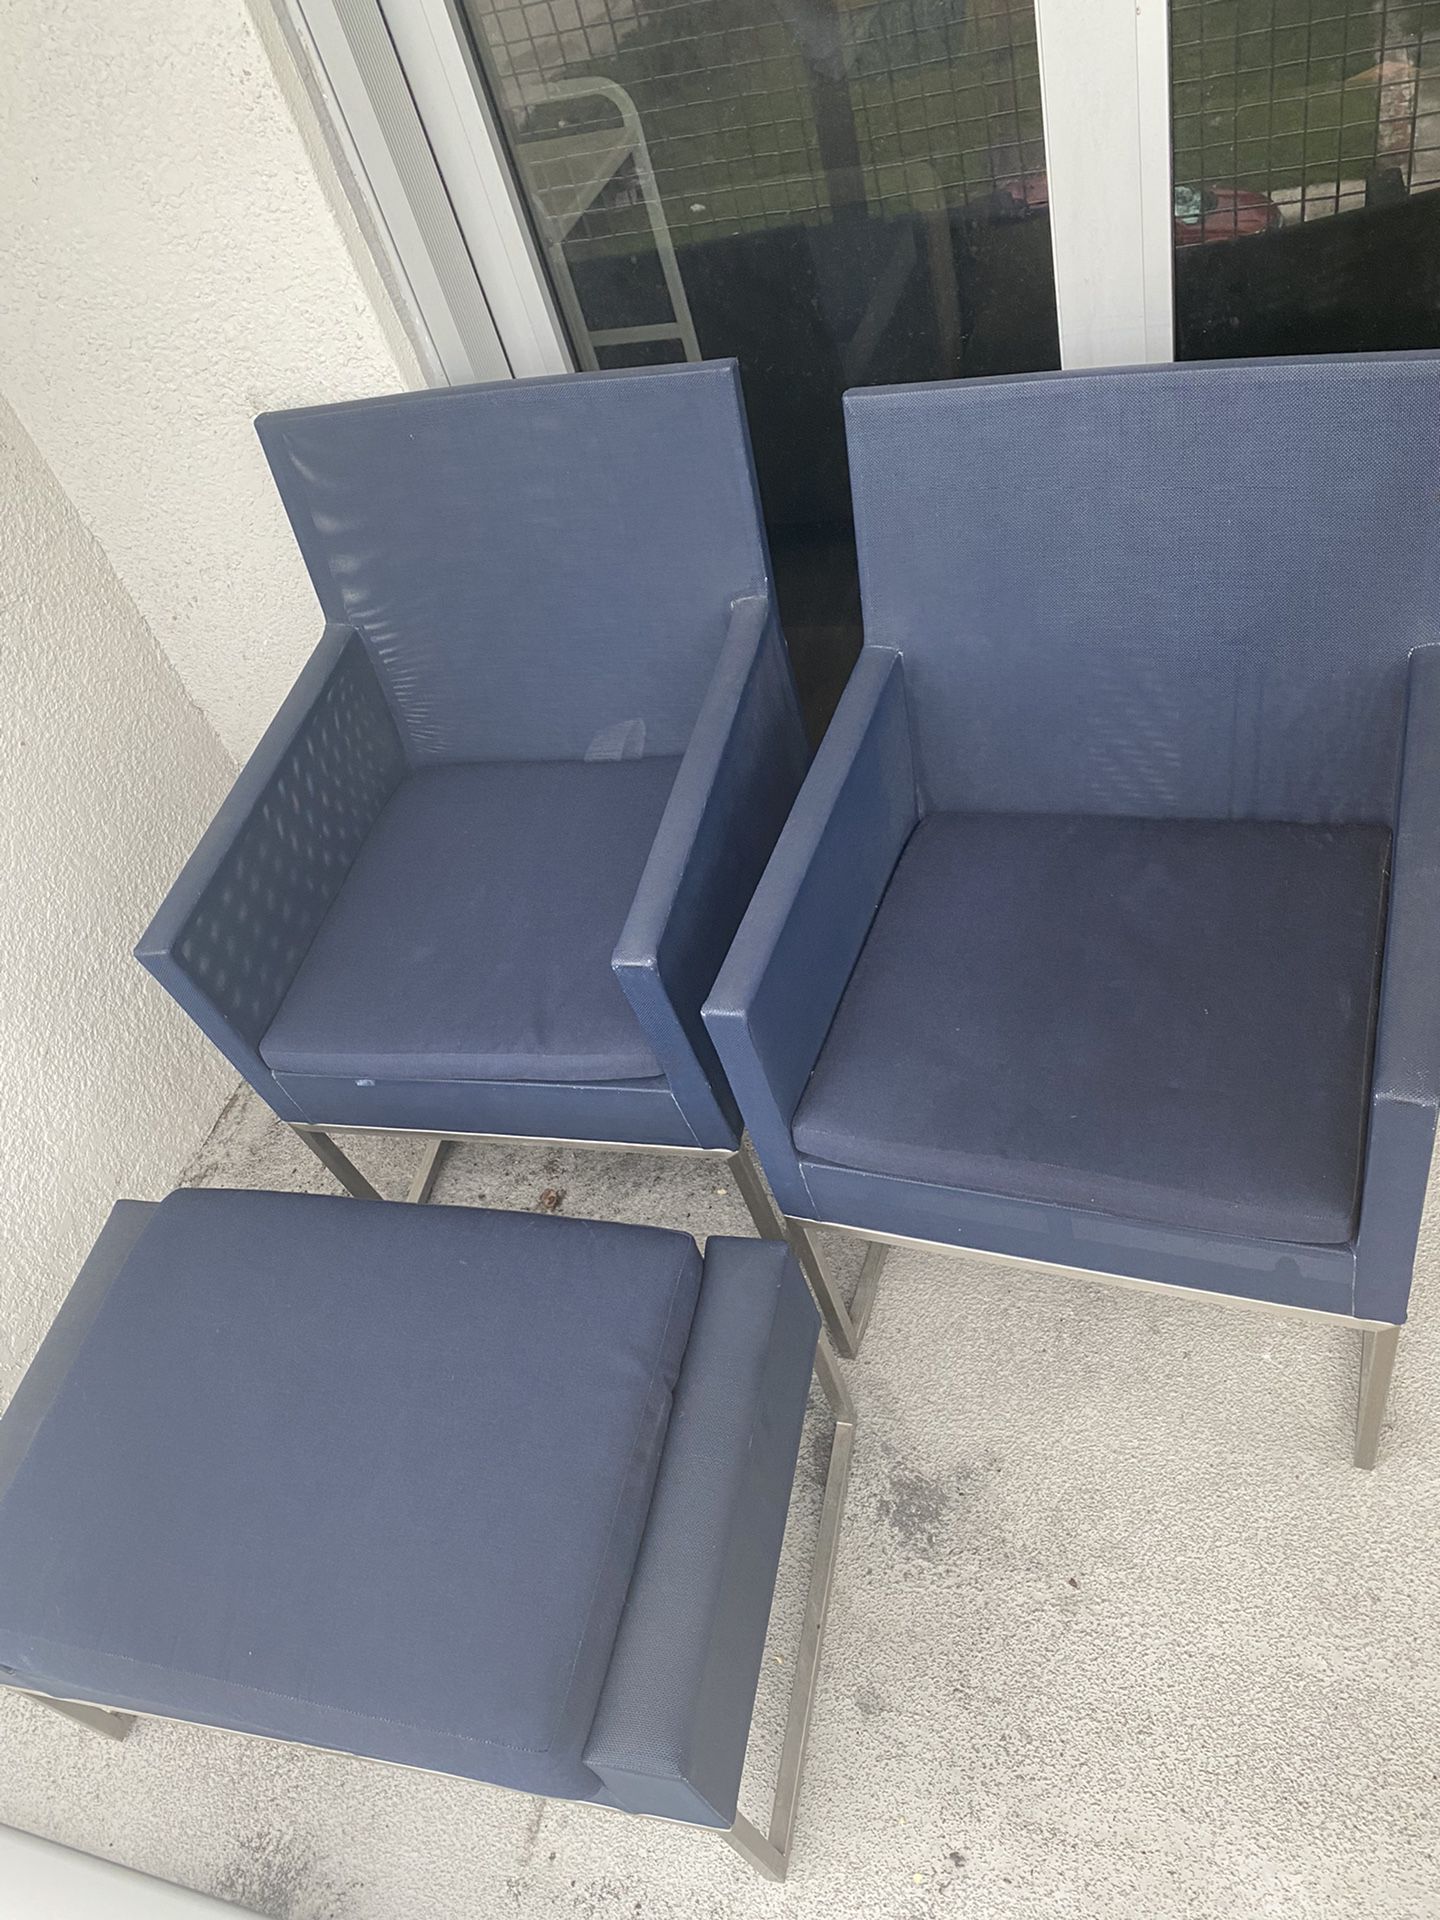 Crate & Barrel Outdoor Chairs